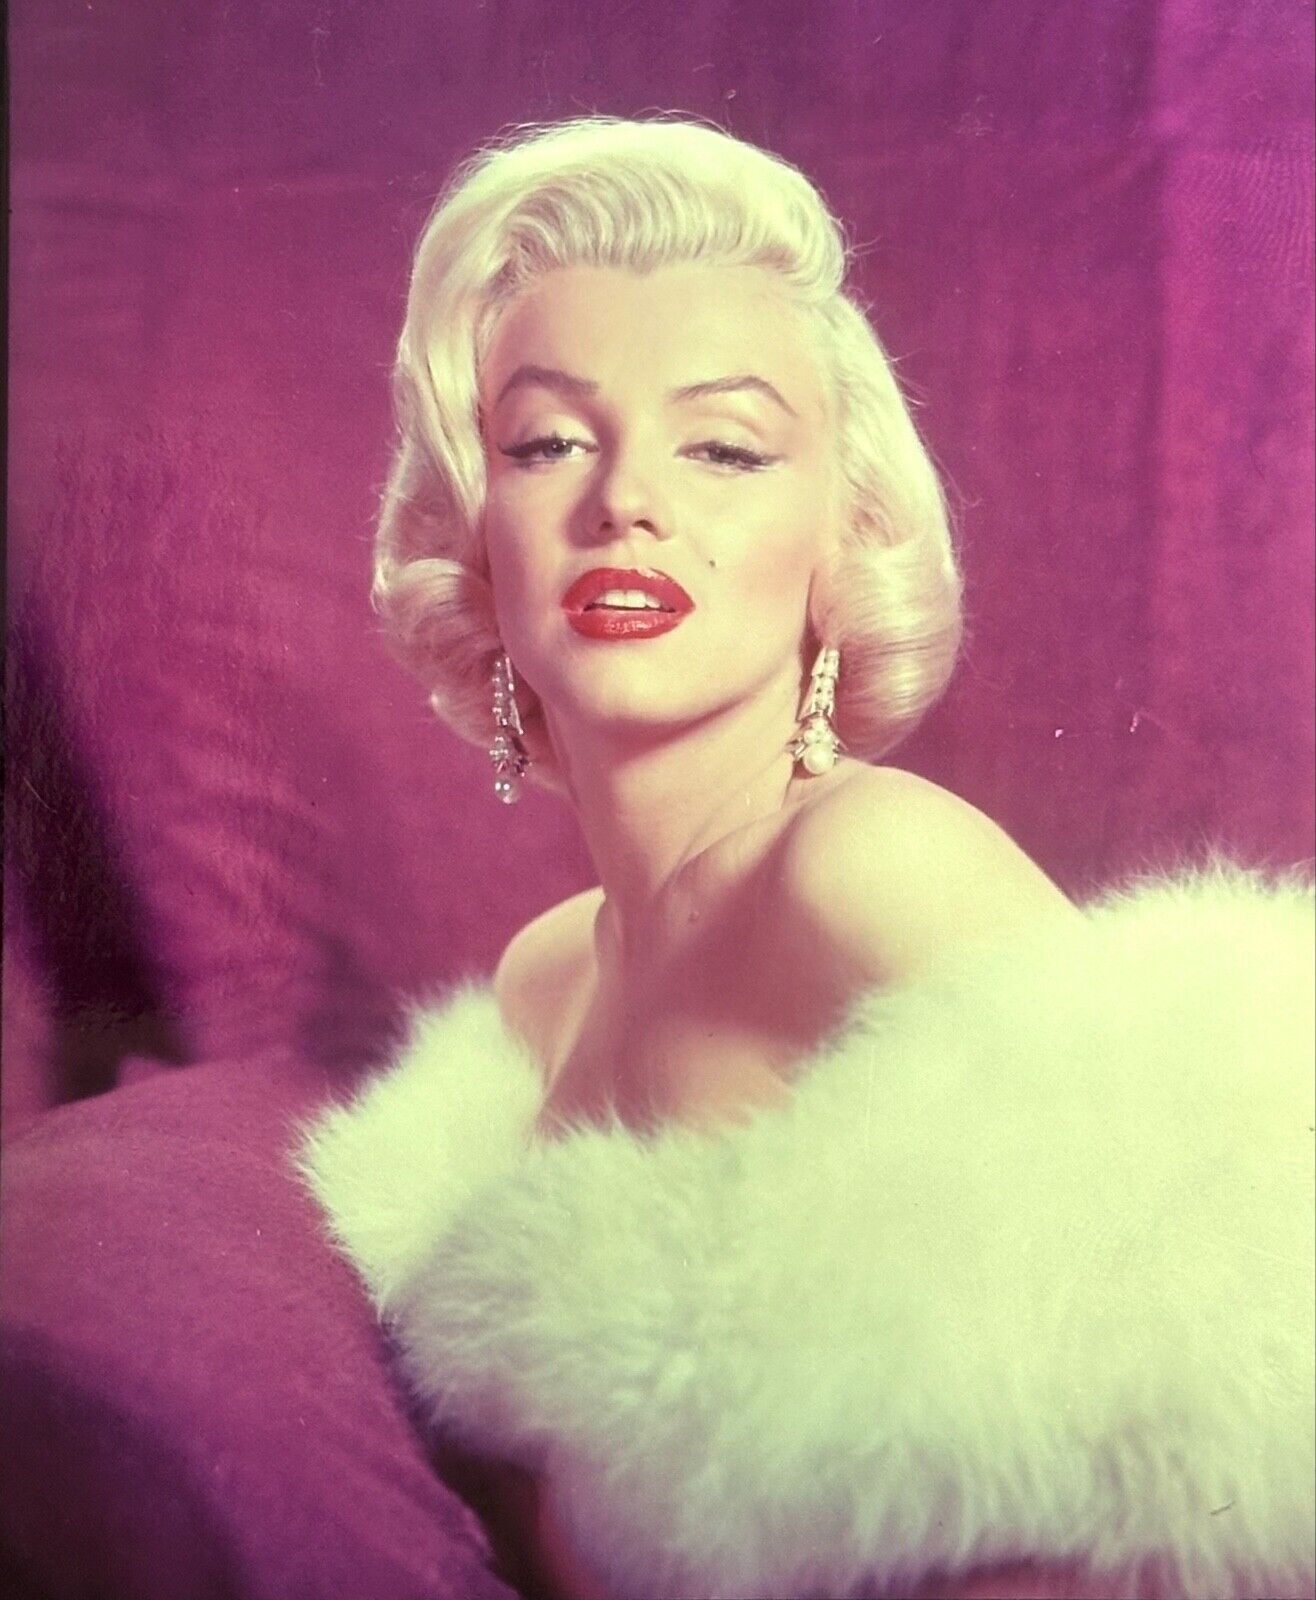 MONROE Marilyn  Epitome Of Glamour Photograph by Frank Powolny Circa 1953